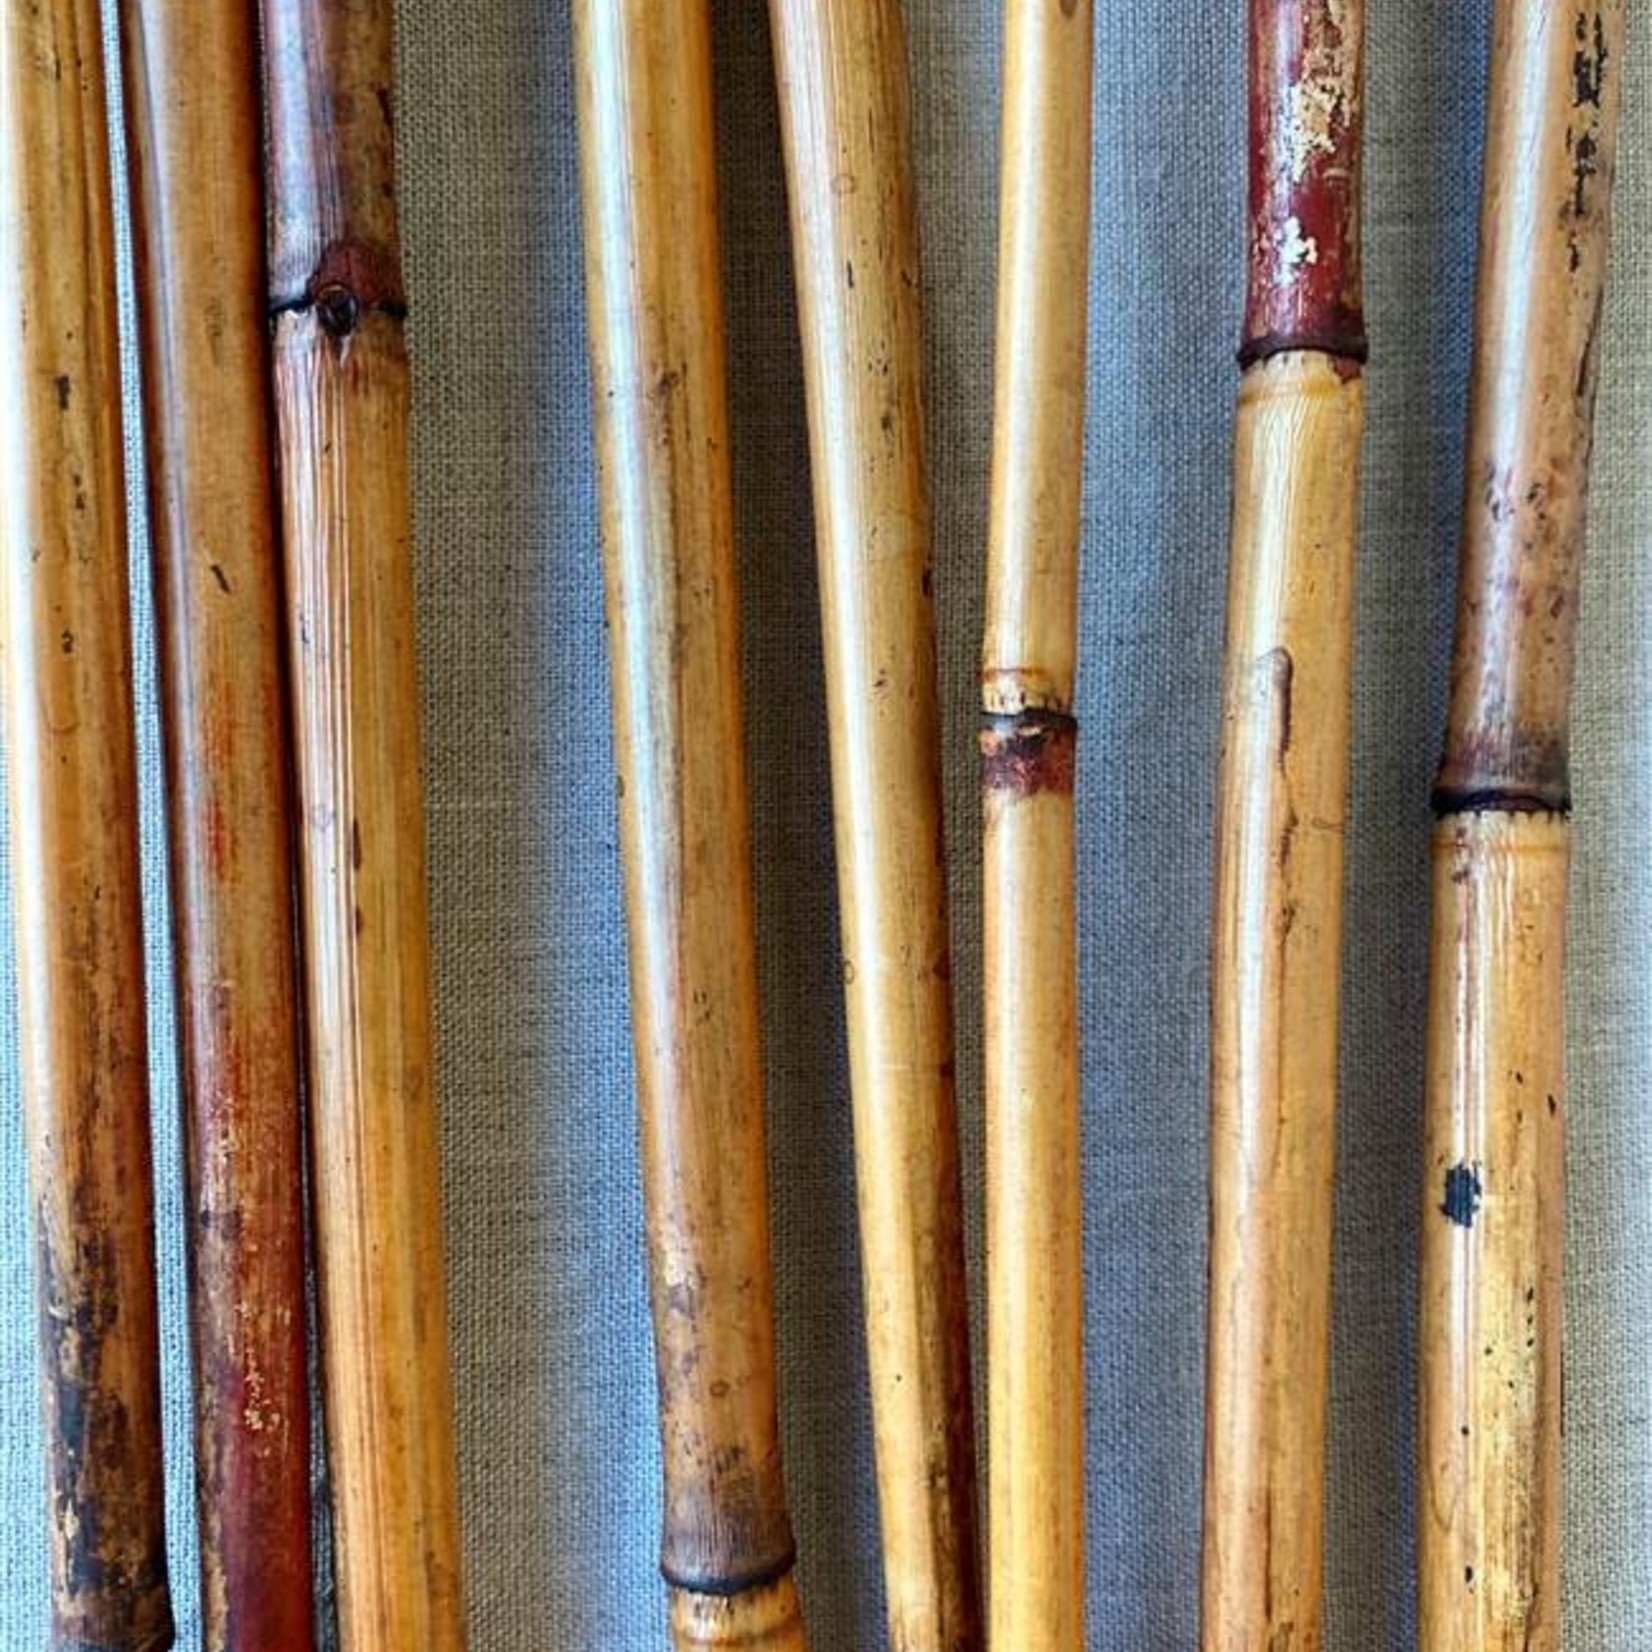 WALNUT RIVER CANE 3.5 FT 25 PCS IN BUNCH